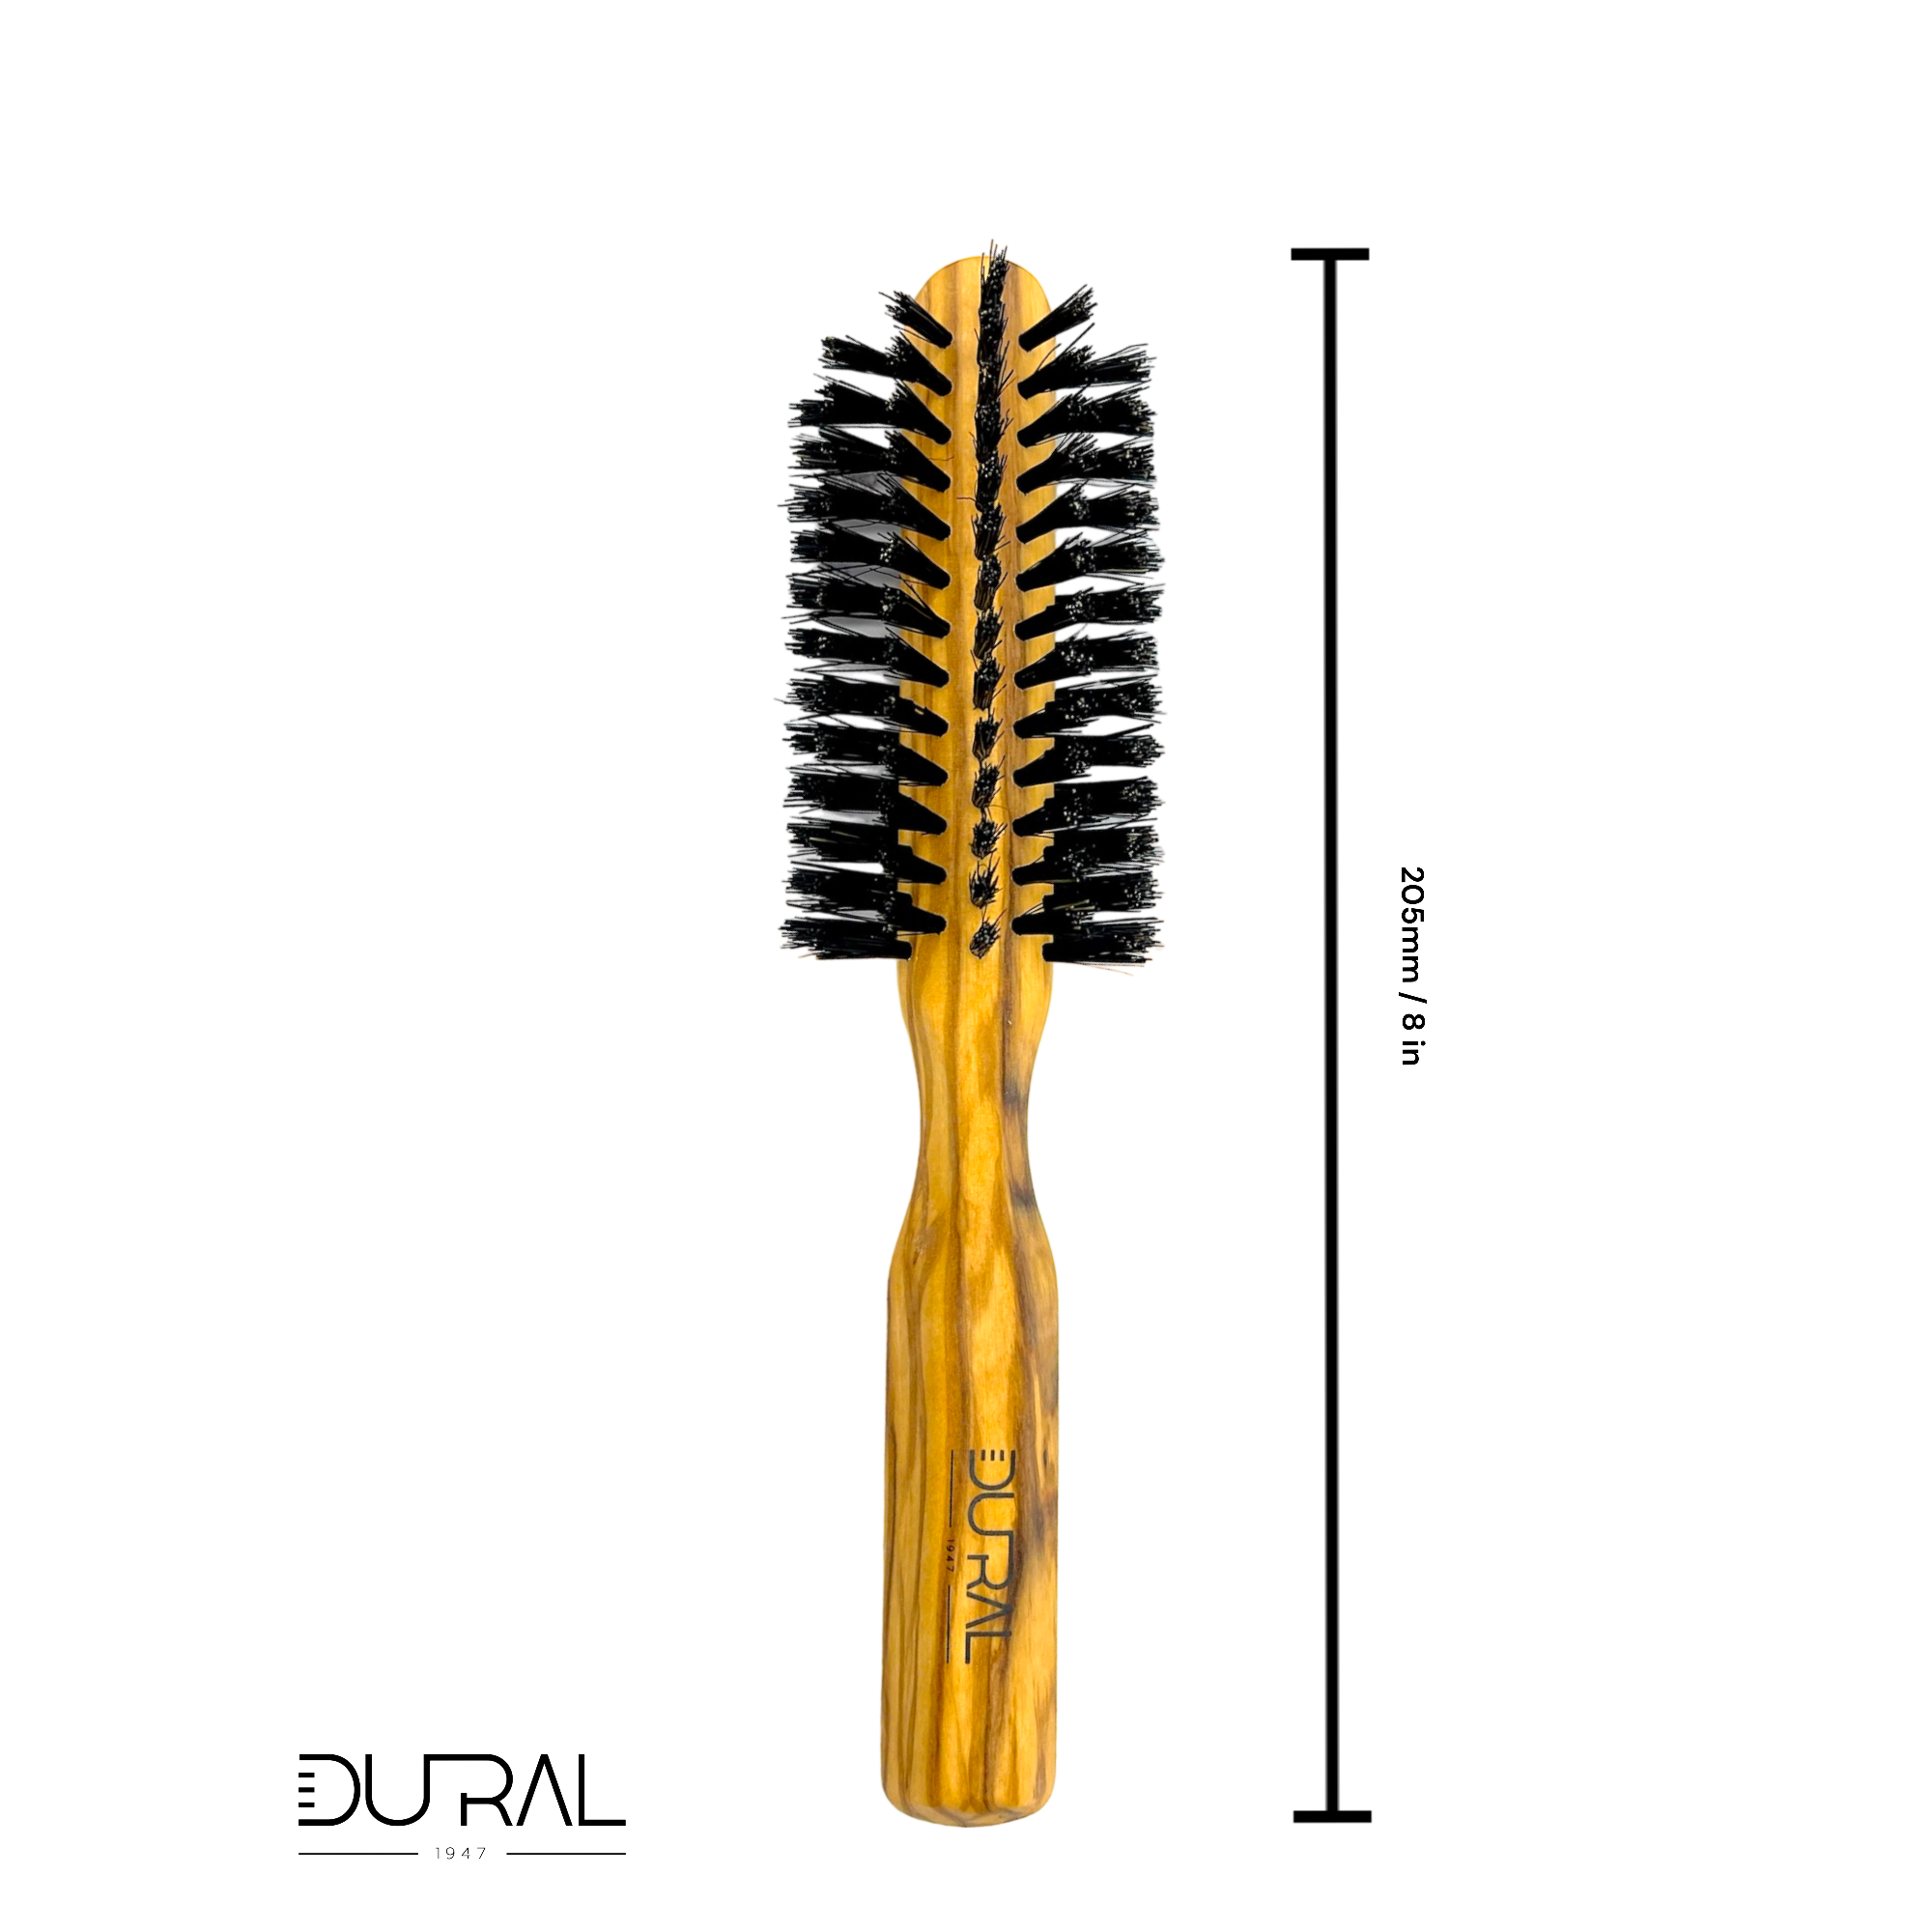 Dural Olive wood half-round hair brush with boar bristles - 7 rows